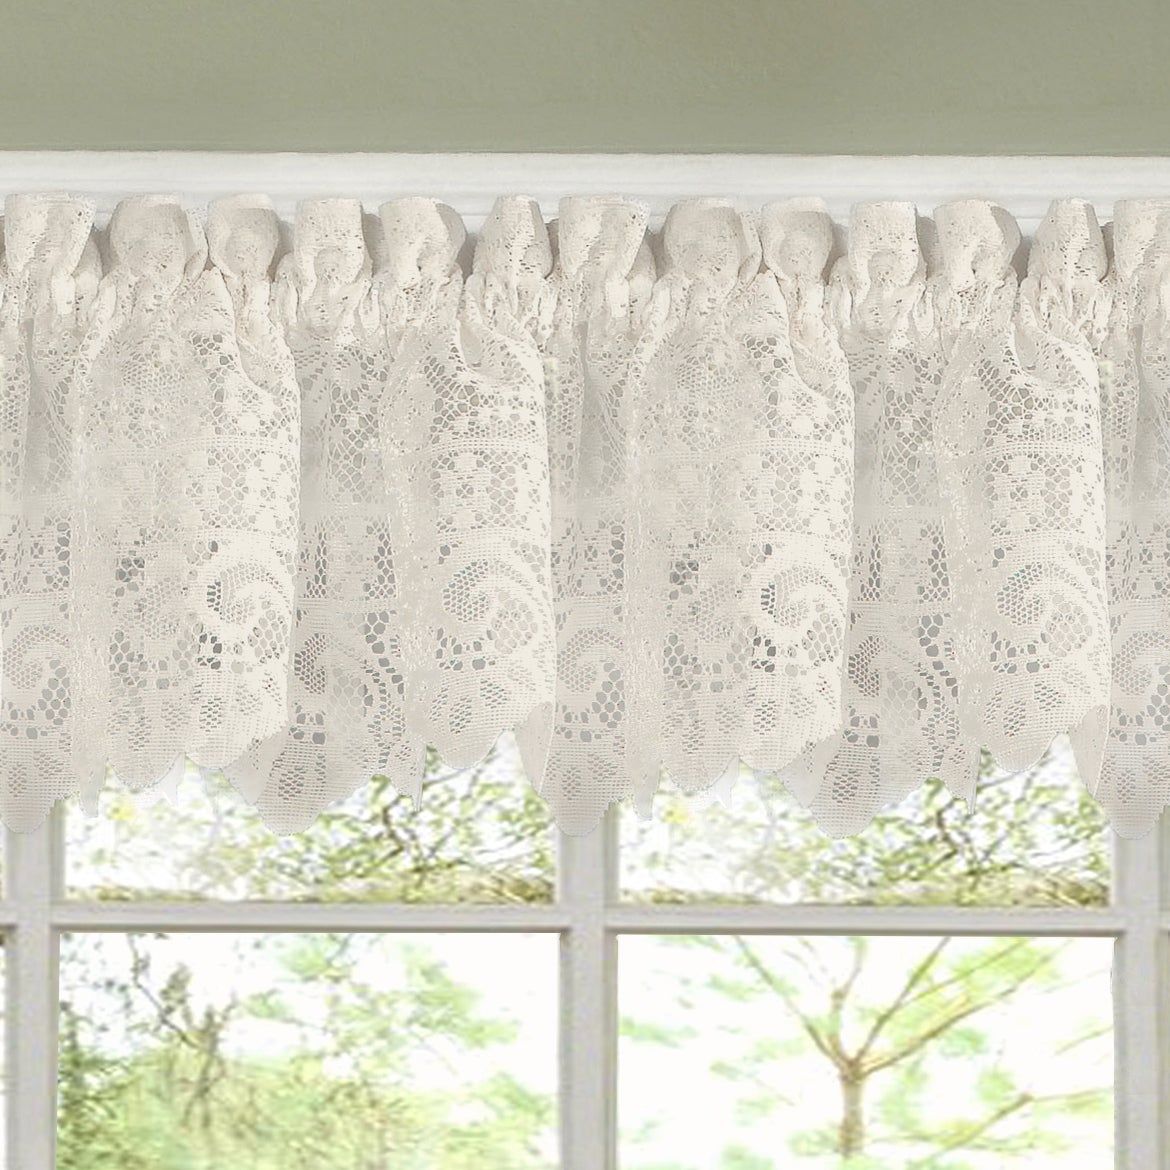 Luxurious Old World Style Lace Kitchen Curtains  Tiers And Valances In Cream With Luxurious Kitchen Curtains Tiers, Shade Or Valances (View 2 of 20)